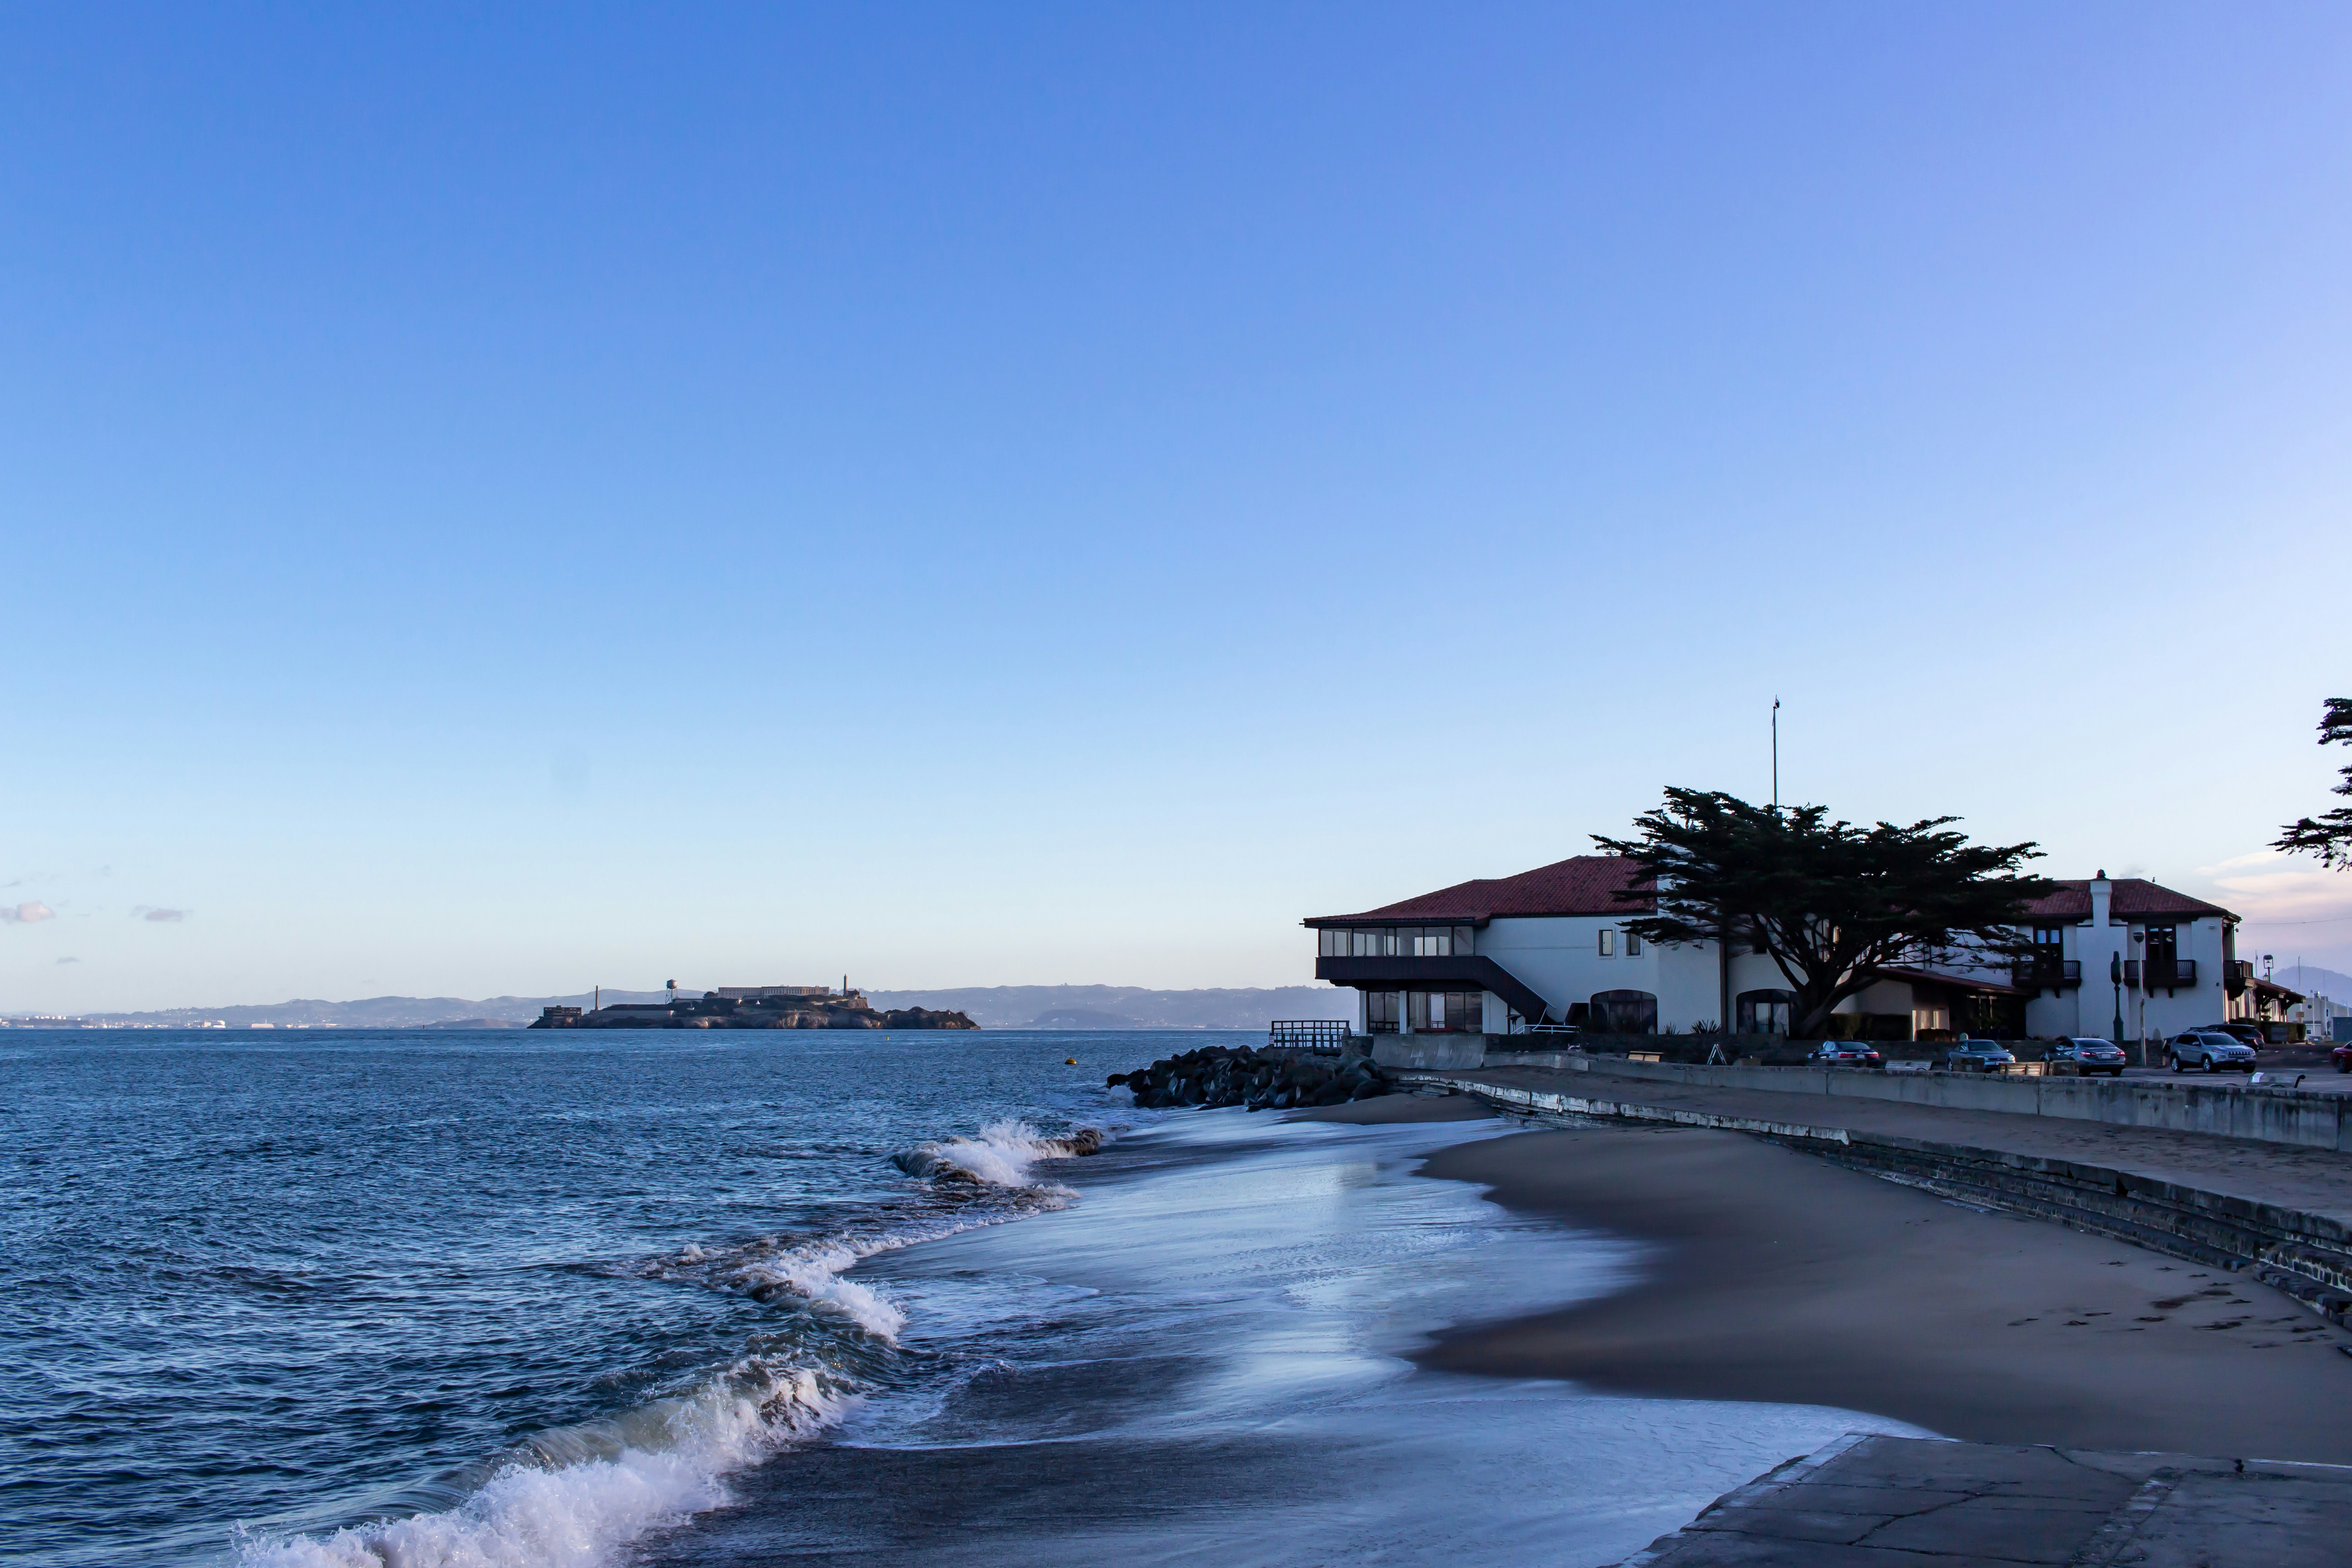 St Francis Yacht Club, San Francisco. That's Alcatraz in the background. Canon EOS 100D